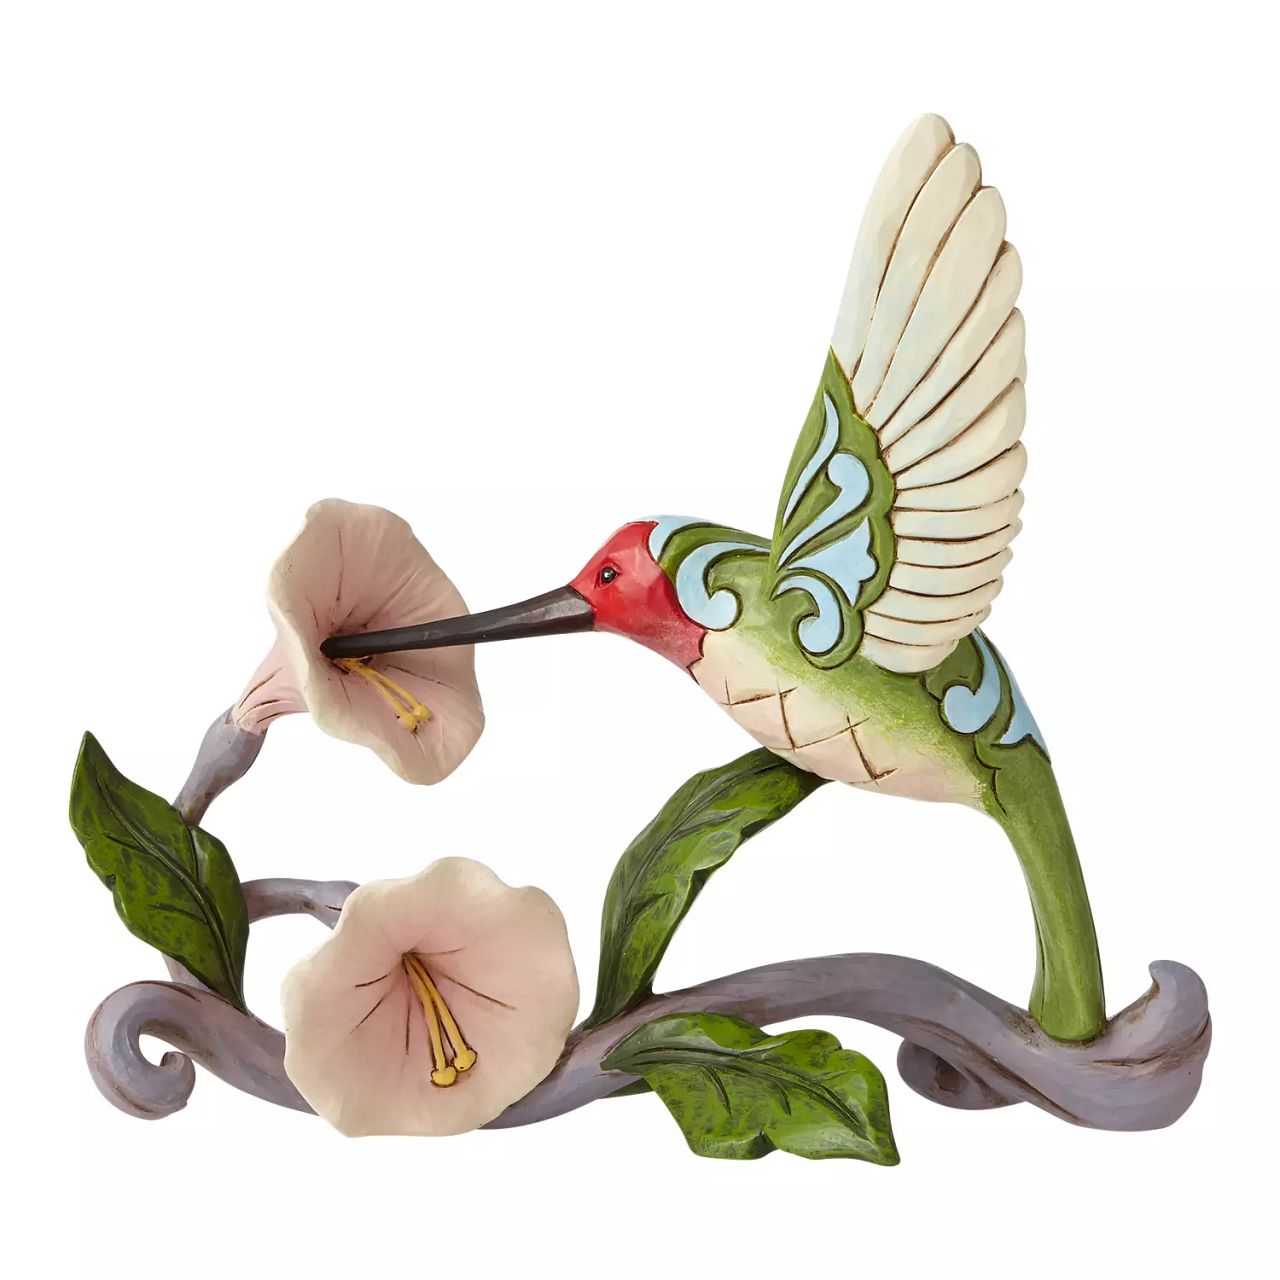 Jim Shore Heartwood Creek Blossoms and Beauty - Hummingbird with Flower  A colourful accent to brighten your day, Jim Shore's richly detailed Hummingbird design features a combination of subtle quilt patterning and beautifully hand-crafted rosemaling motifs. Each Heartwood Creek piece is hand painted, crafted using high quality cast stone. Comes in a branded Kraft gift box.